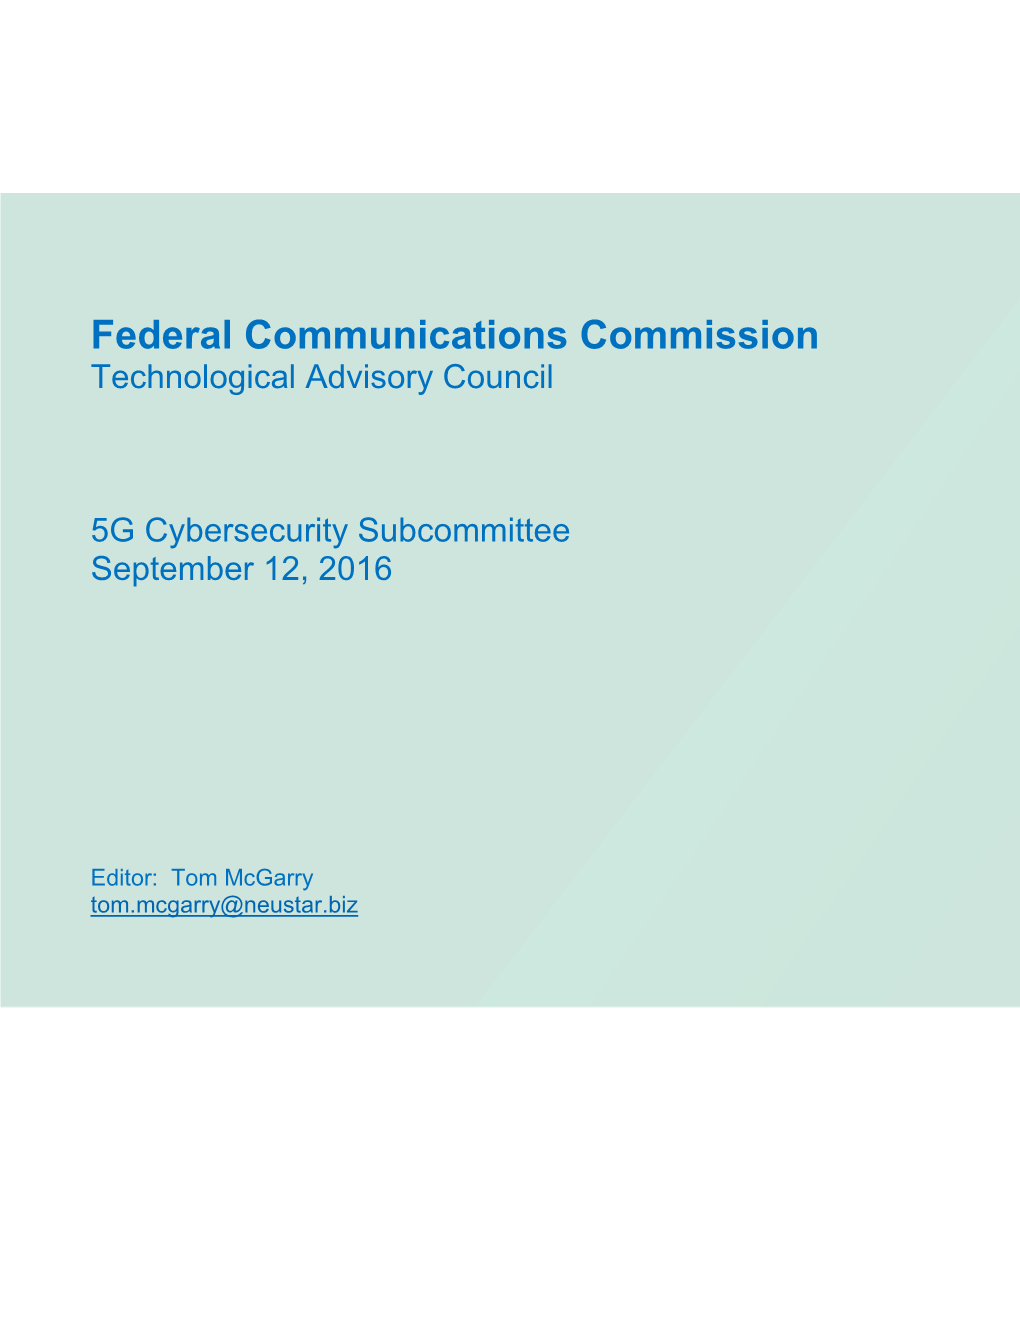 Federal Communications Commission Technological Advisory Council